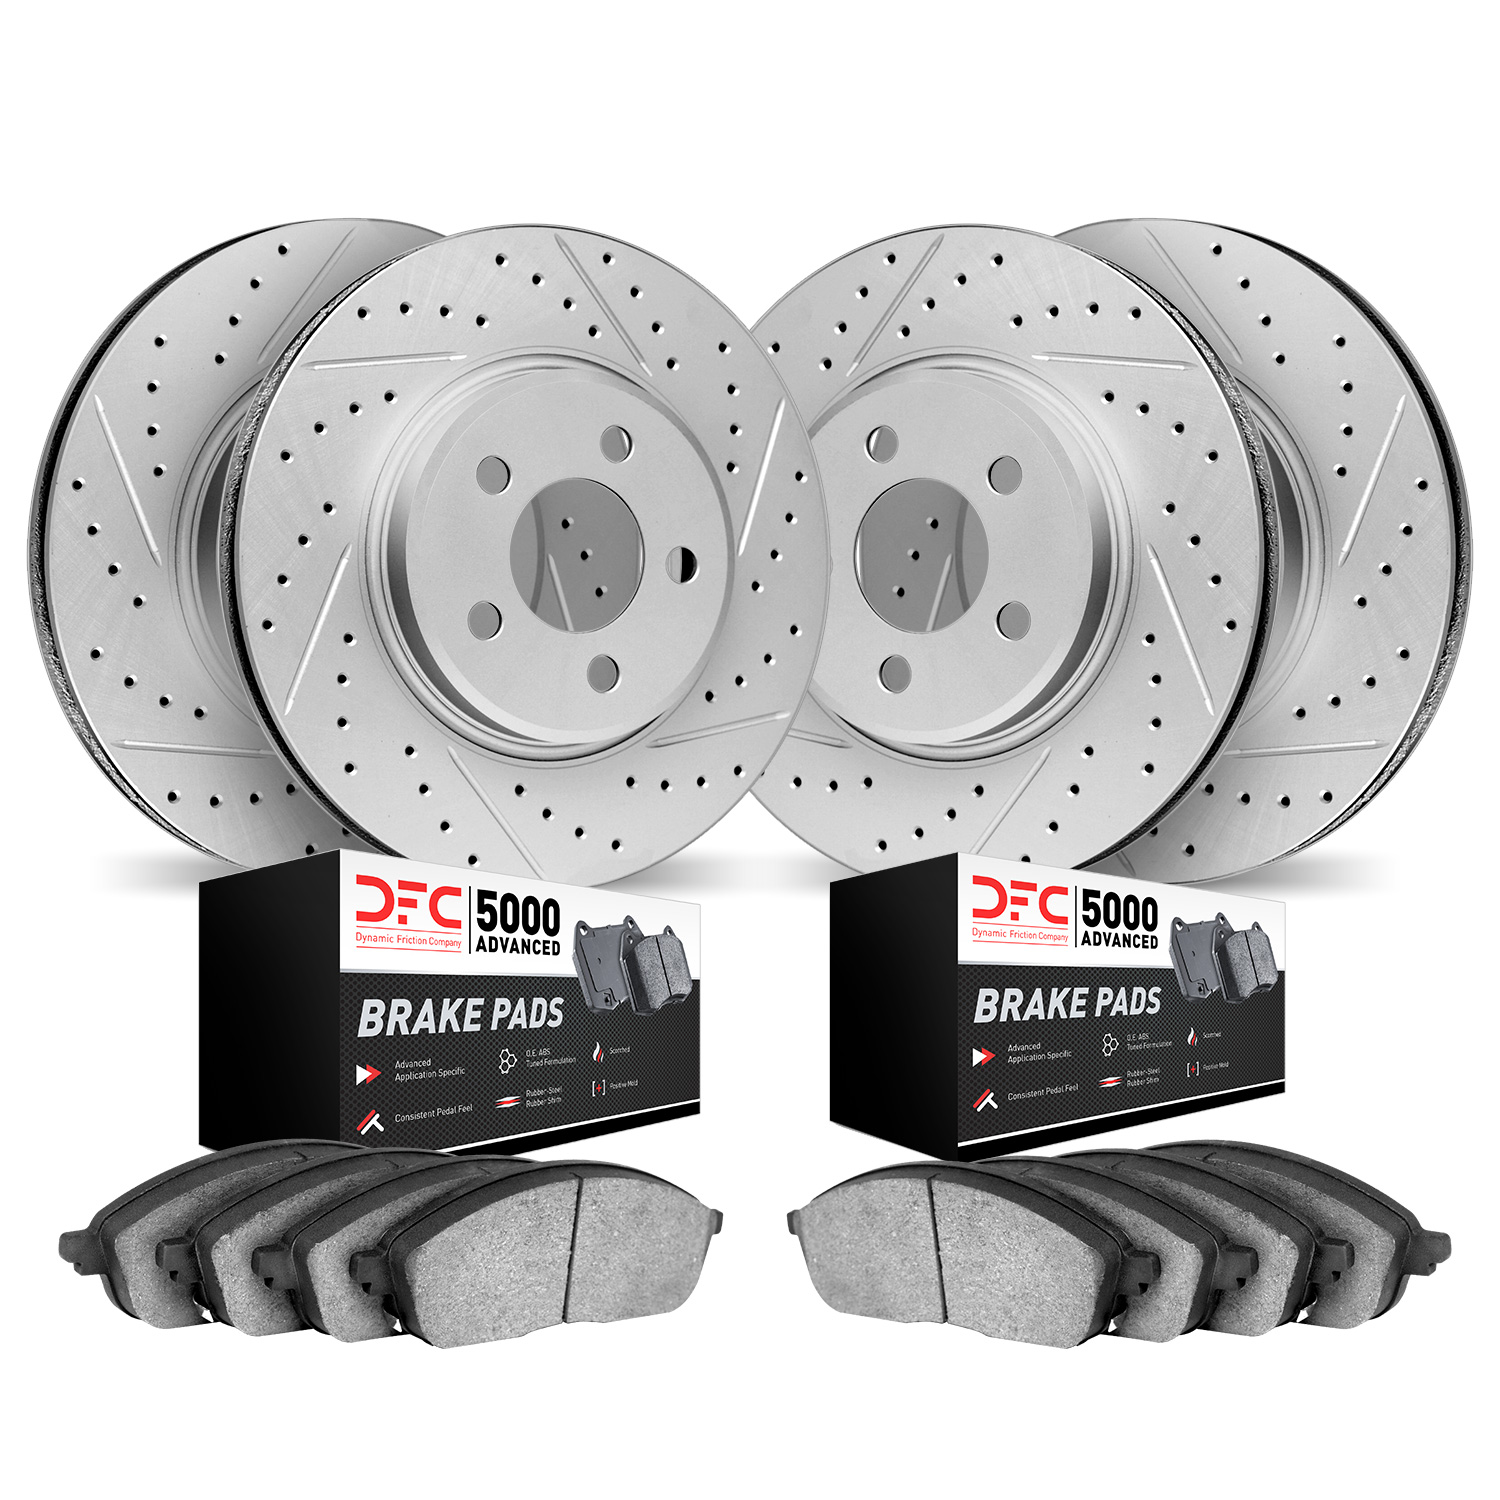 2504-13009 Geoperformance Drilled/Slotted Rotors w/5000 Advanced Brake Pads Kit, 2013-2020 Multiple Makes/Models, Position: Fron